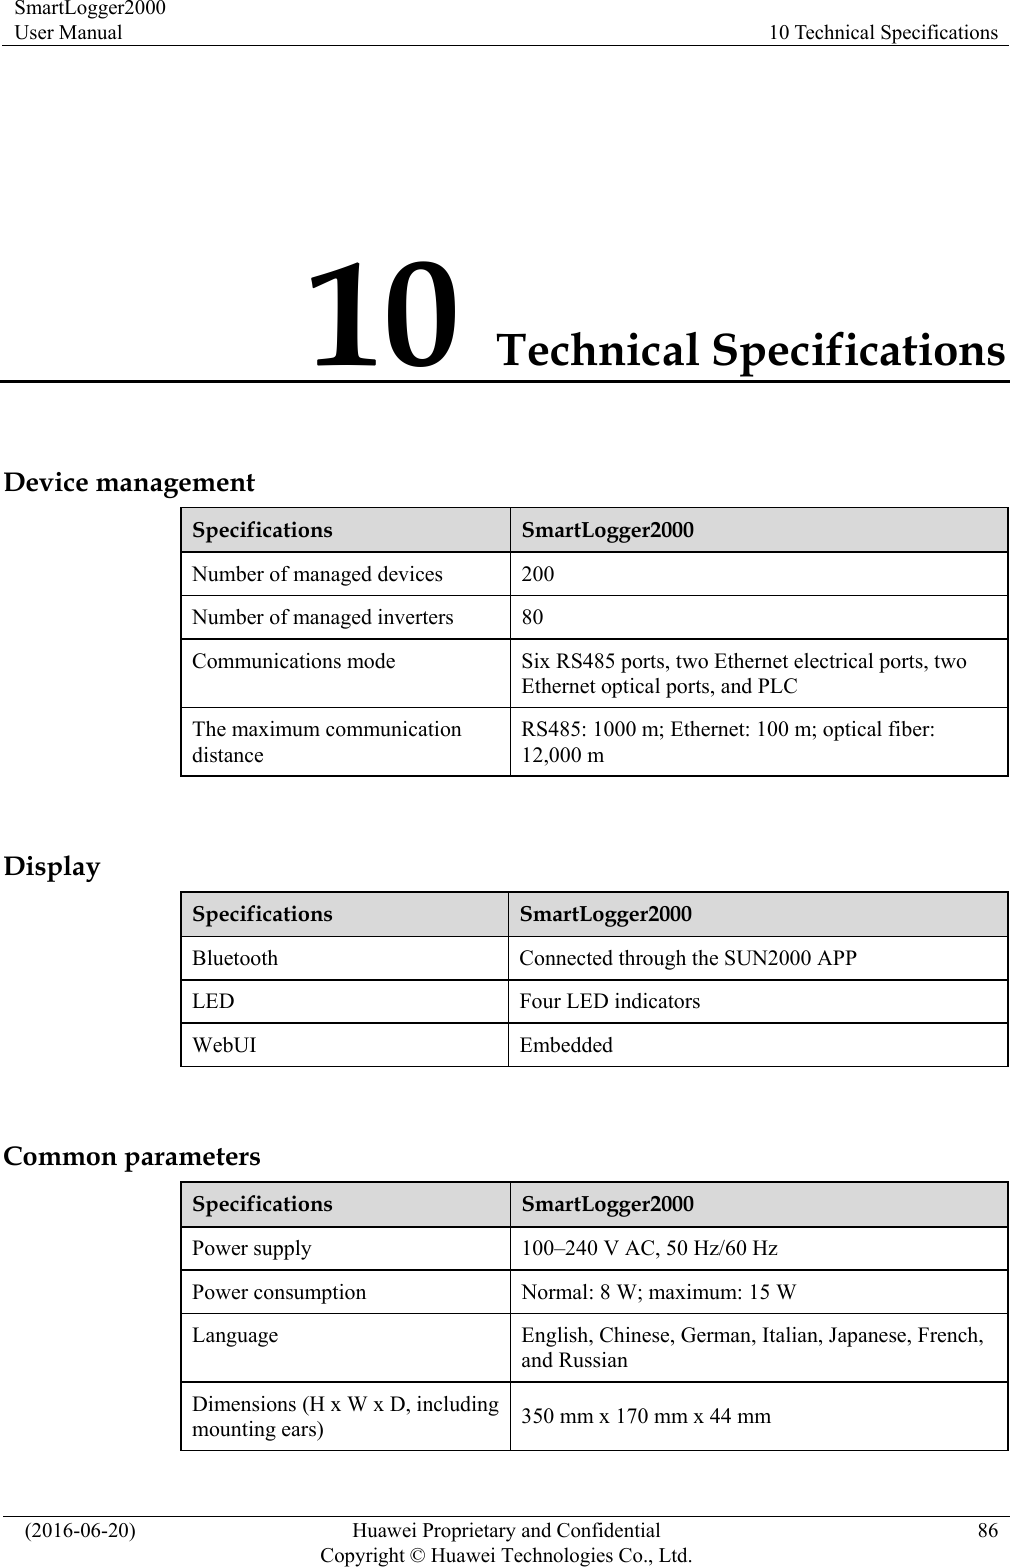 SmartLogger2000 User Manual  10 Technical Specifications   (2016-06-20)  Huawei Proprietary and Confidential         Copyright © Huawei Technologies Co., Ltd.86 10 Technical Specifications Device management Specifications  SmartLogger2000 Number of managed devices  200 Number of managed inverters  80 Communications mode  Six RS485 ports, two Ethernet electrical ports, two Ethernet optical ports, and PLC The maximum communication distance RS485: 1000 m; Ethernet: 100 m; optical fiber: 12,000 m  Display Specifications  SmartLogger2000 Bluetooth  Connected through the SUN2000 APP LED  Four LED indicators WebUI Embedded  Common parameters Specifications  SmartLogger2000 Power supply  100–240 V AC, 50 Hz/60 Hz Power consumption  Normal: 8 W; maximum: 15 W   Language  English, Chinese, German, Italian, Japanese, French, and Russian Dimensions (H x W x D, including mounting ears)  350 mm x 170 mm x 44 mm 